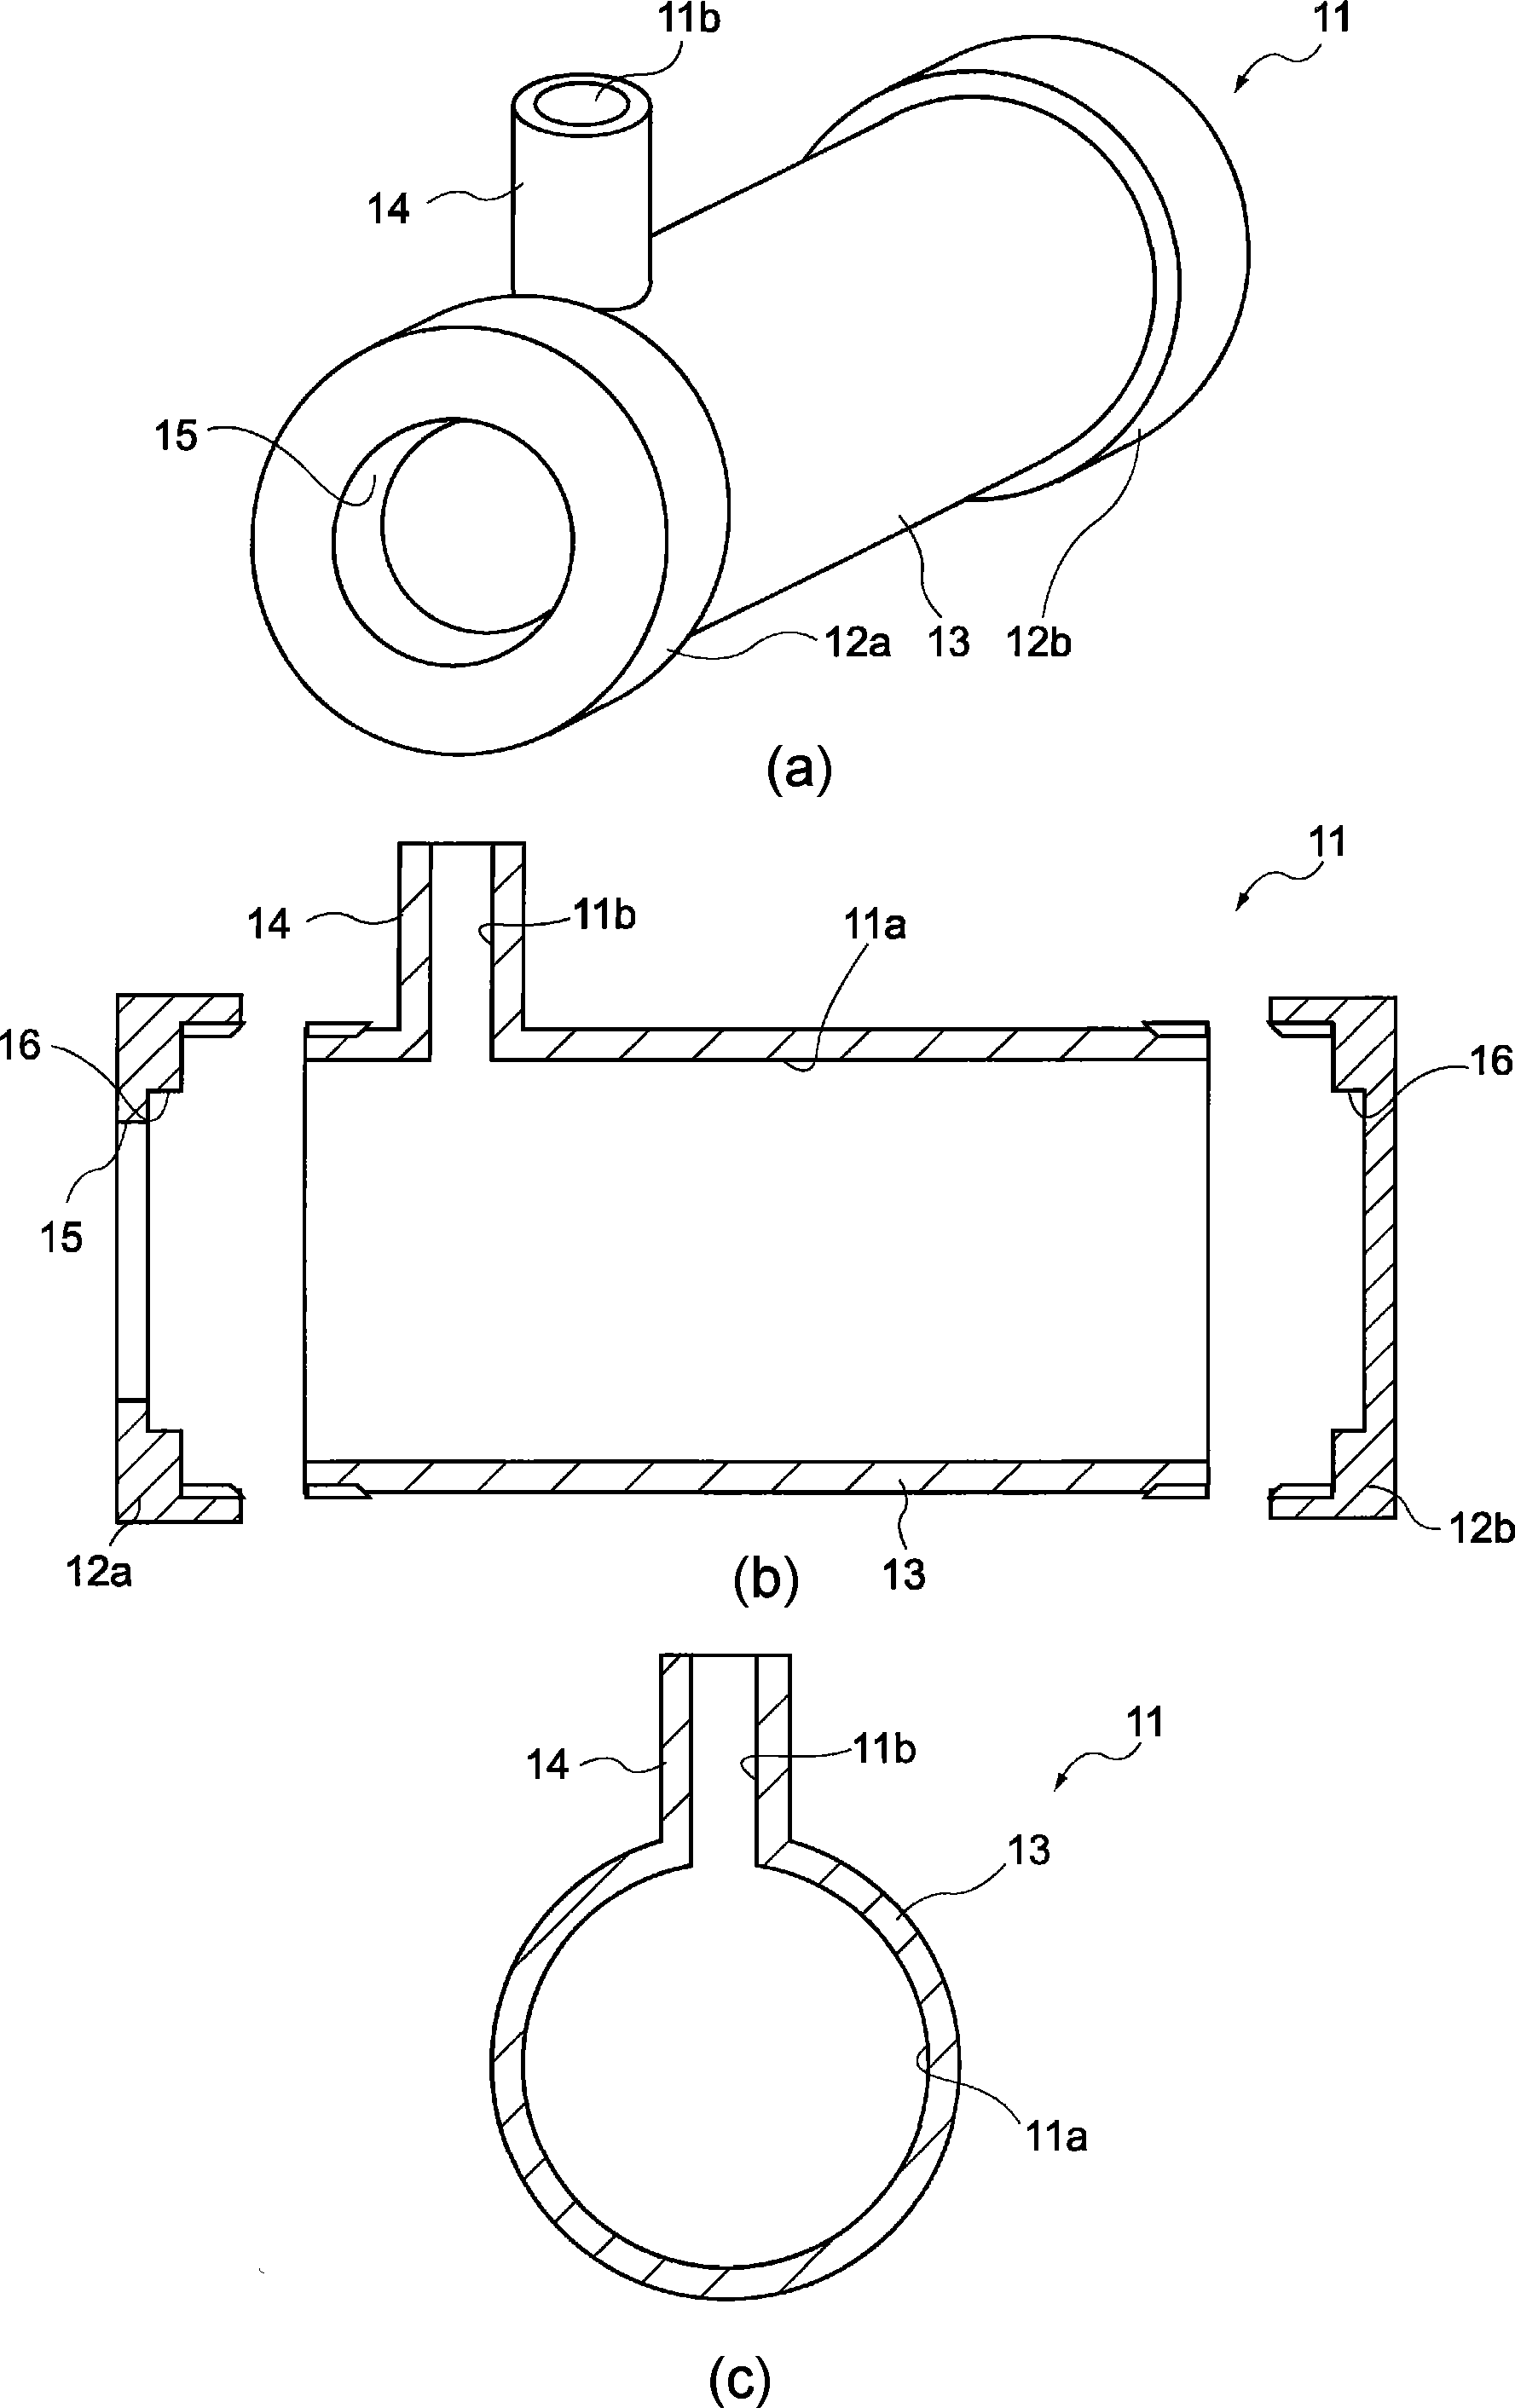 Swirling flow producing apparatus, method of producing swirling flow, vapor phase generating apparatus, microbubble generating apparatus, fluid mixer and fluid injection nozzle